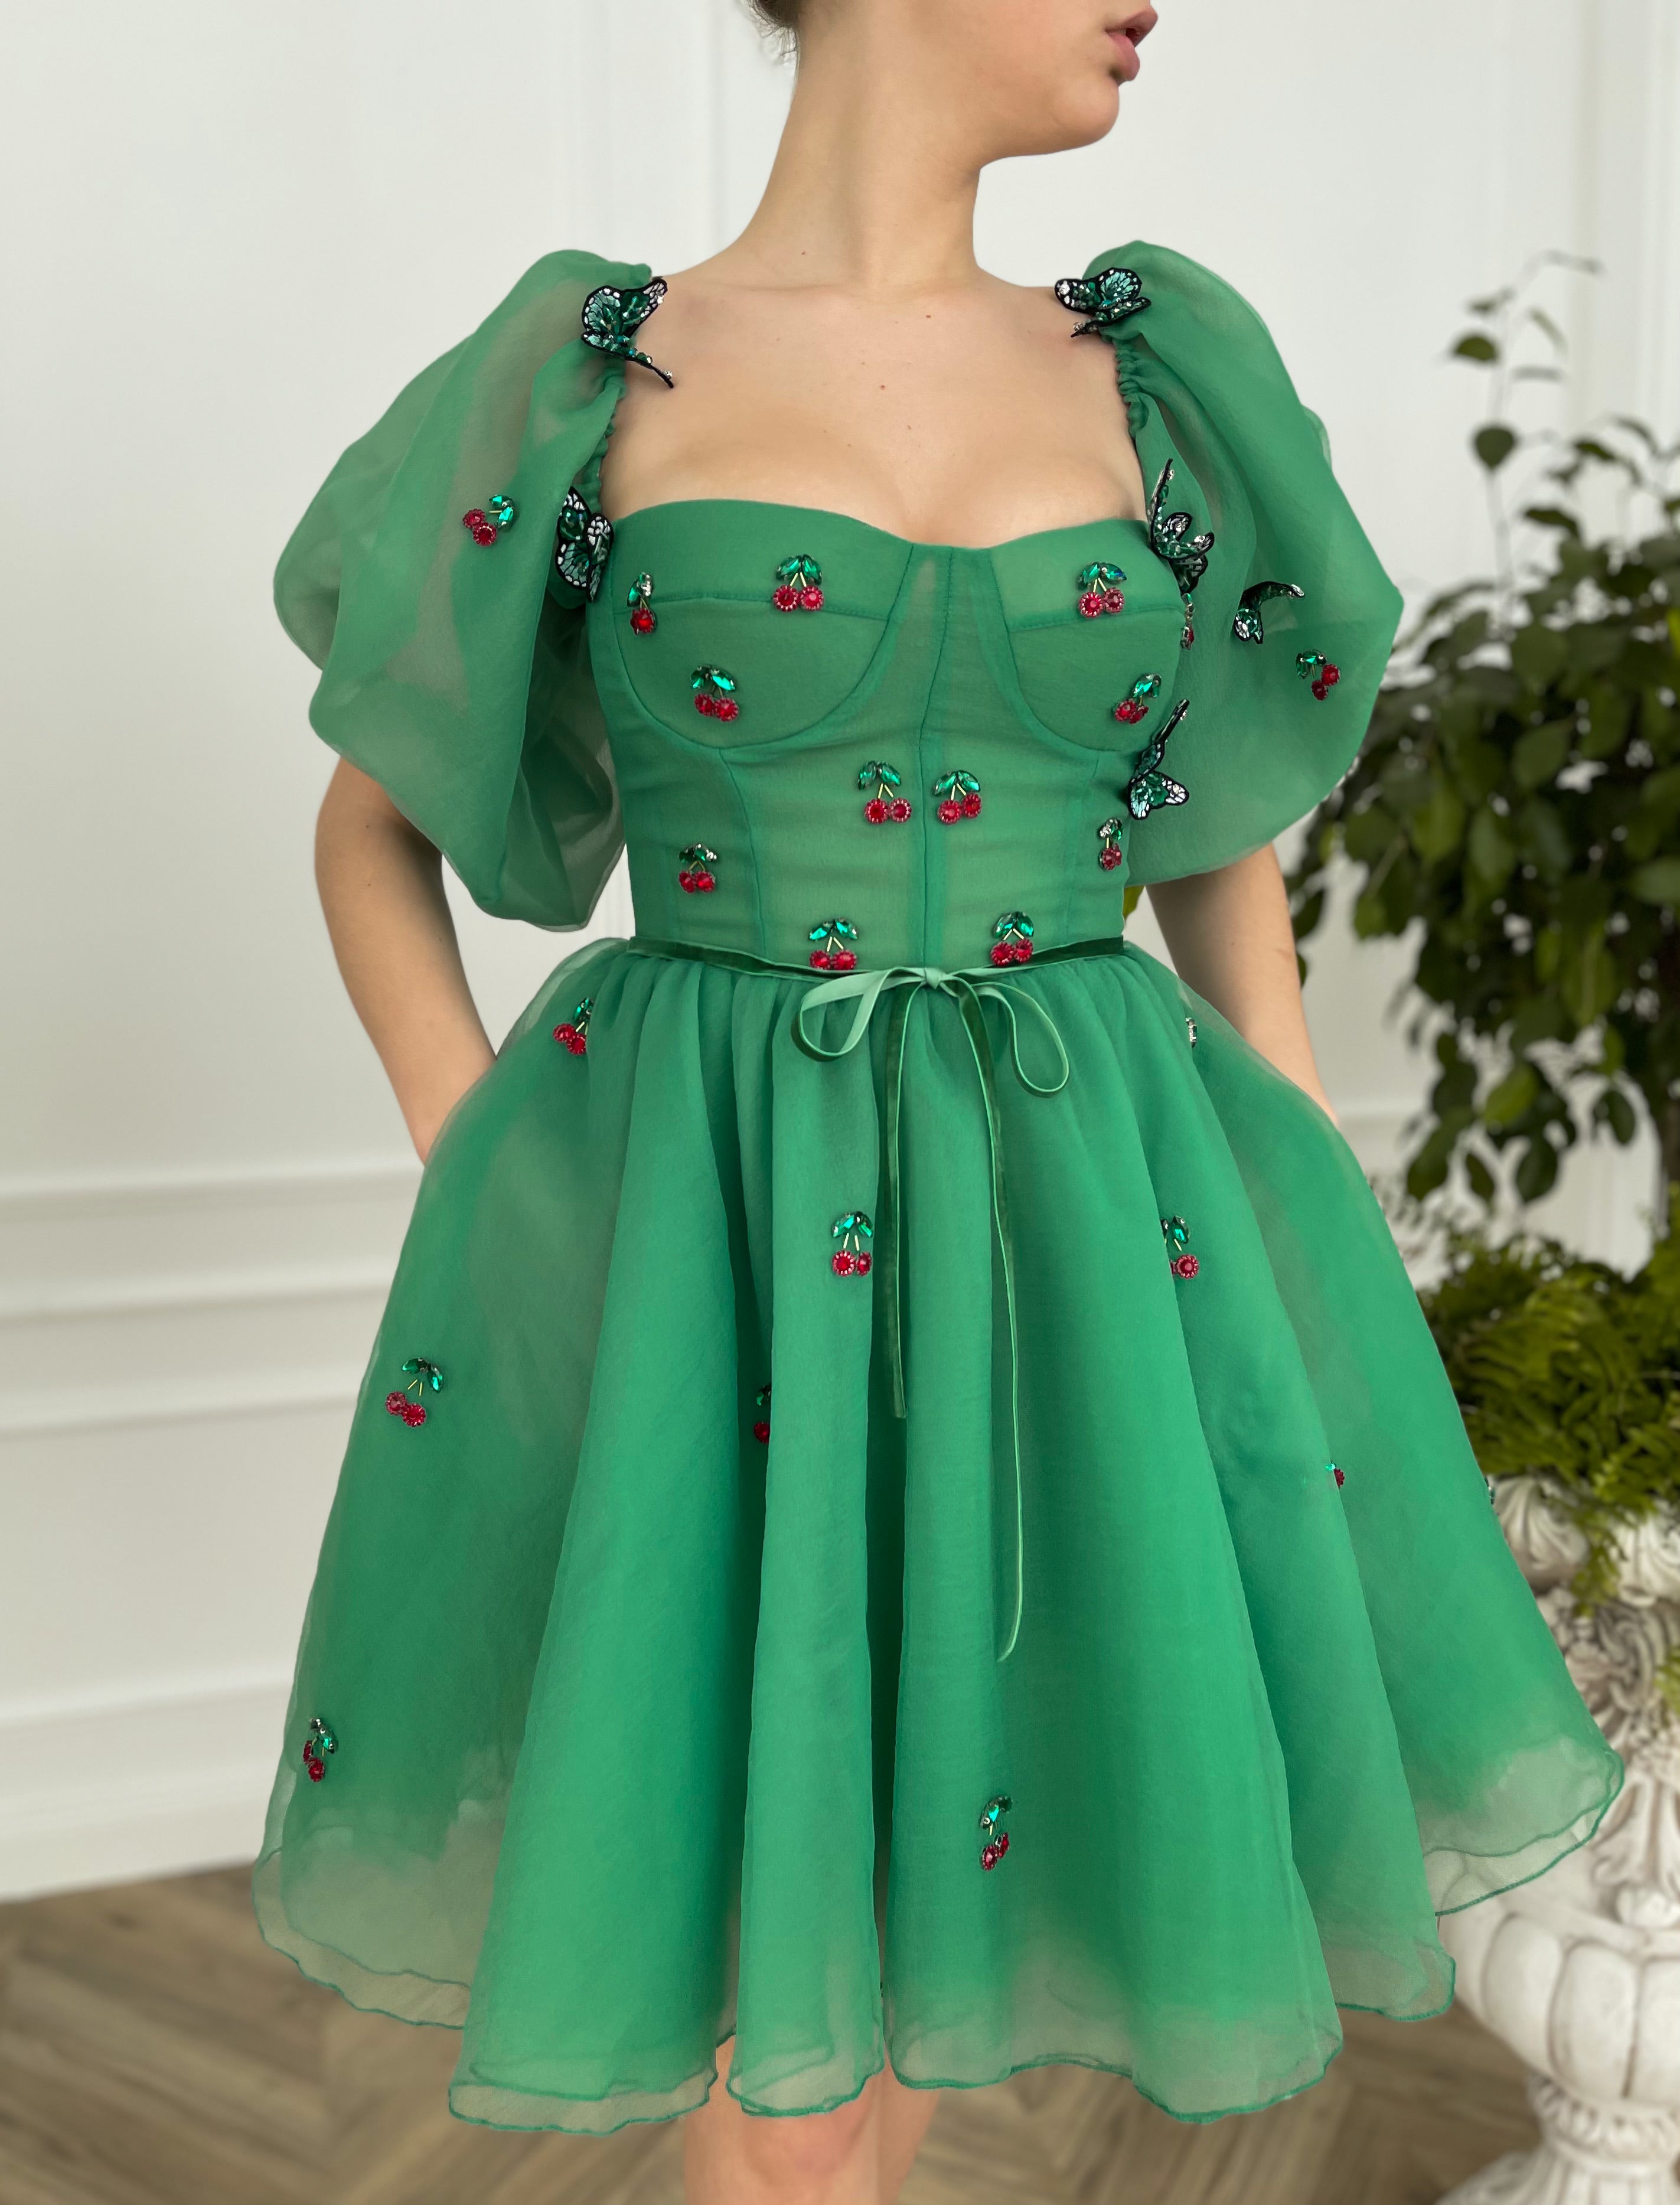 Green mini dress with embroidered cherries, butterflies and off the shoulder sleeves 